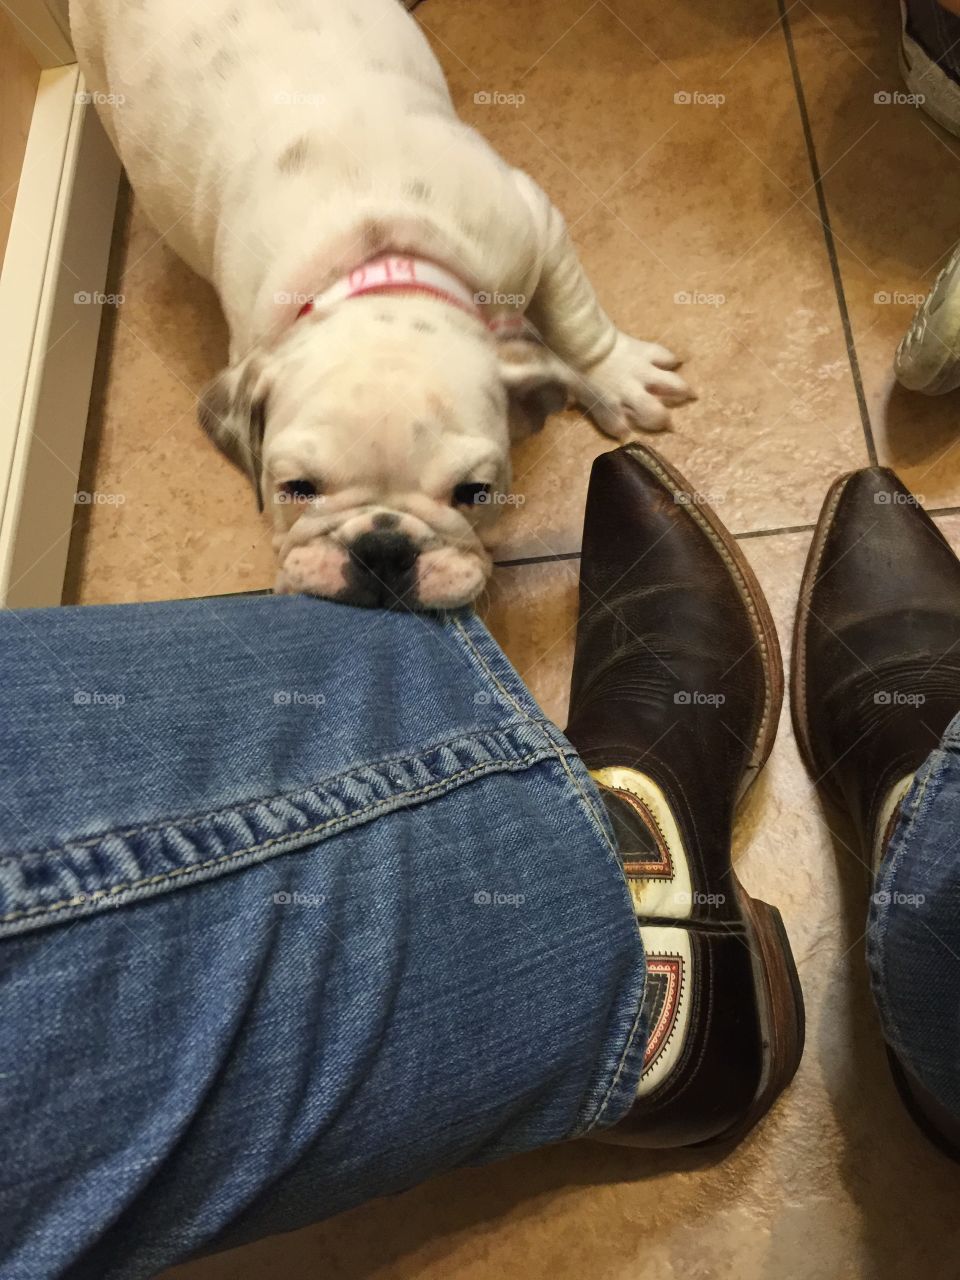 Bulldog puppy tugging on jeans